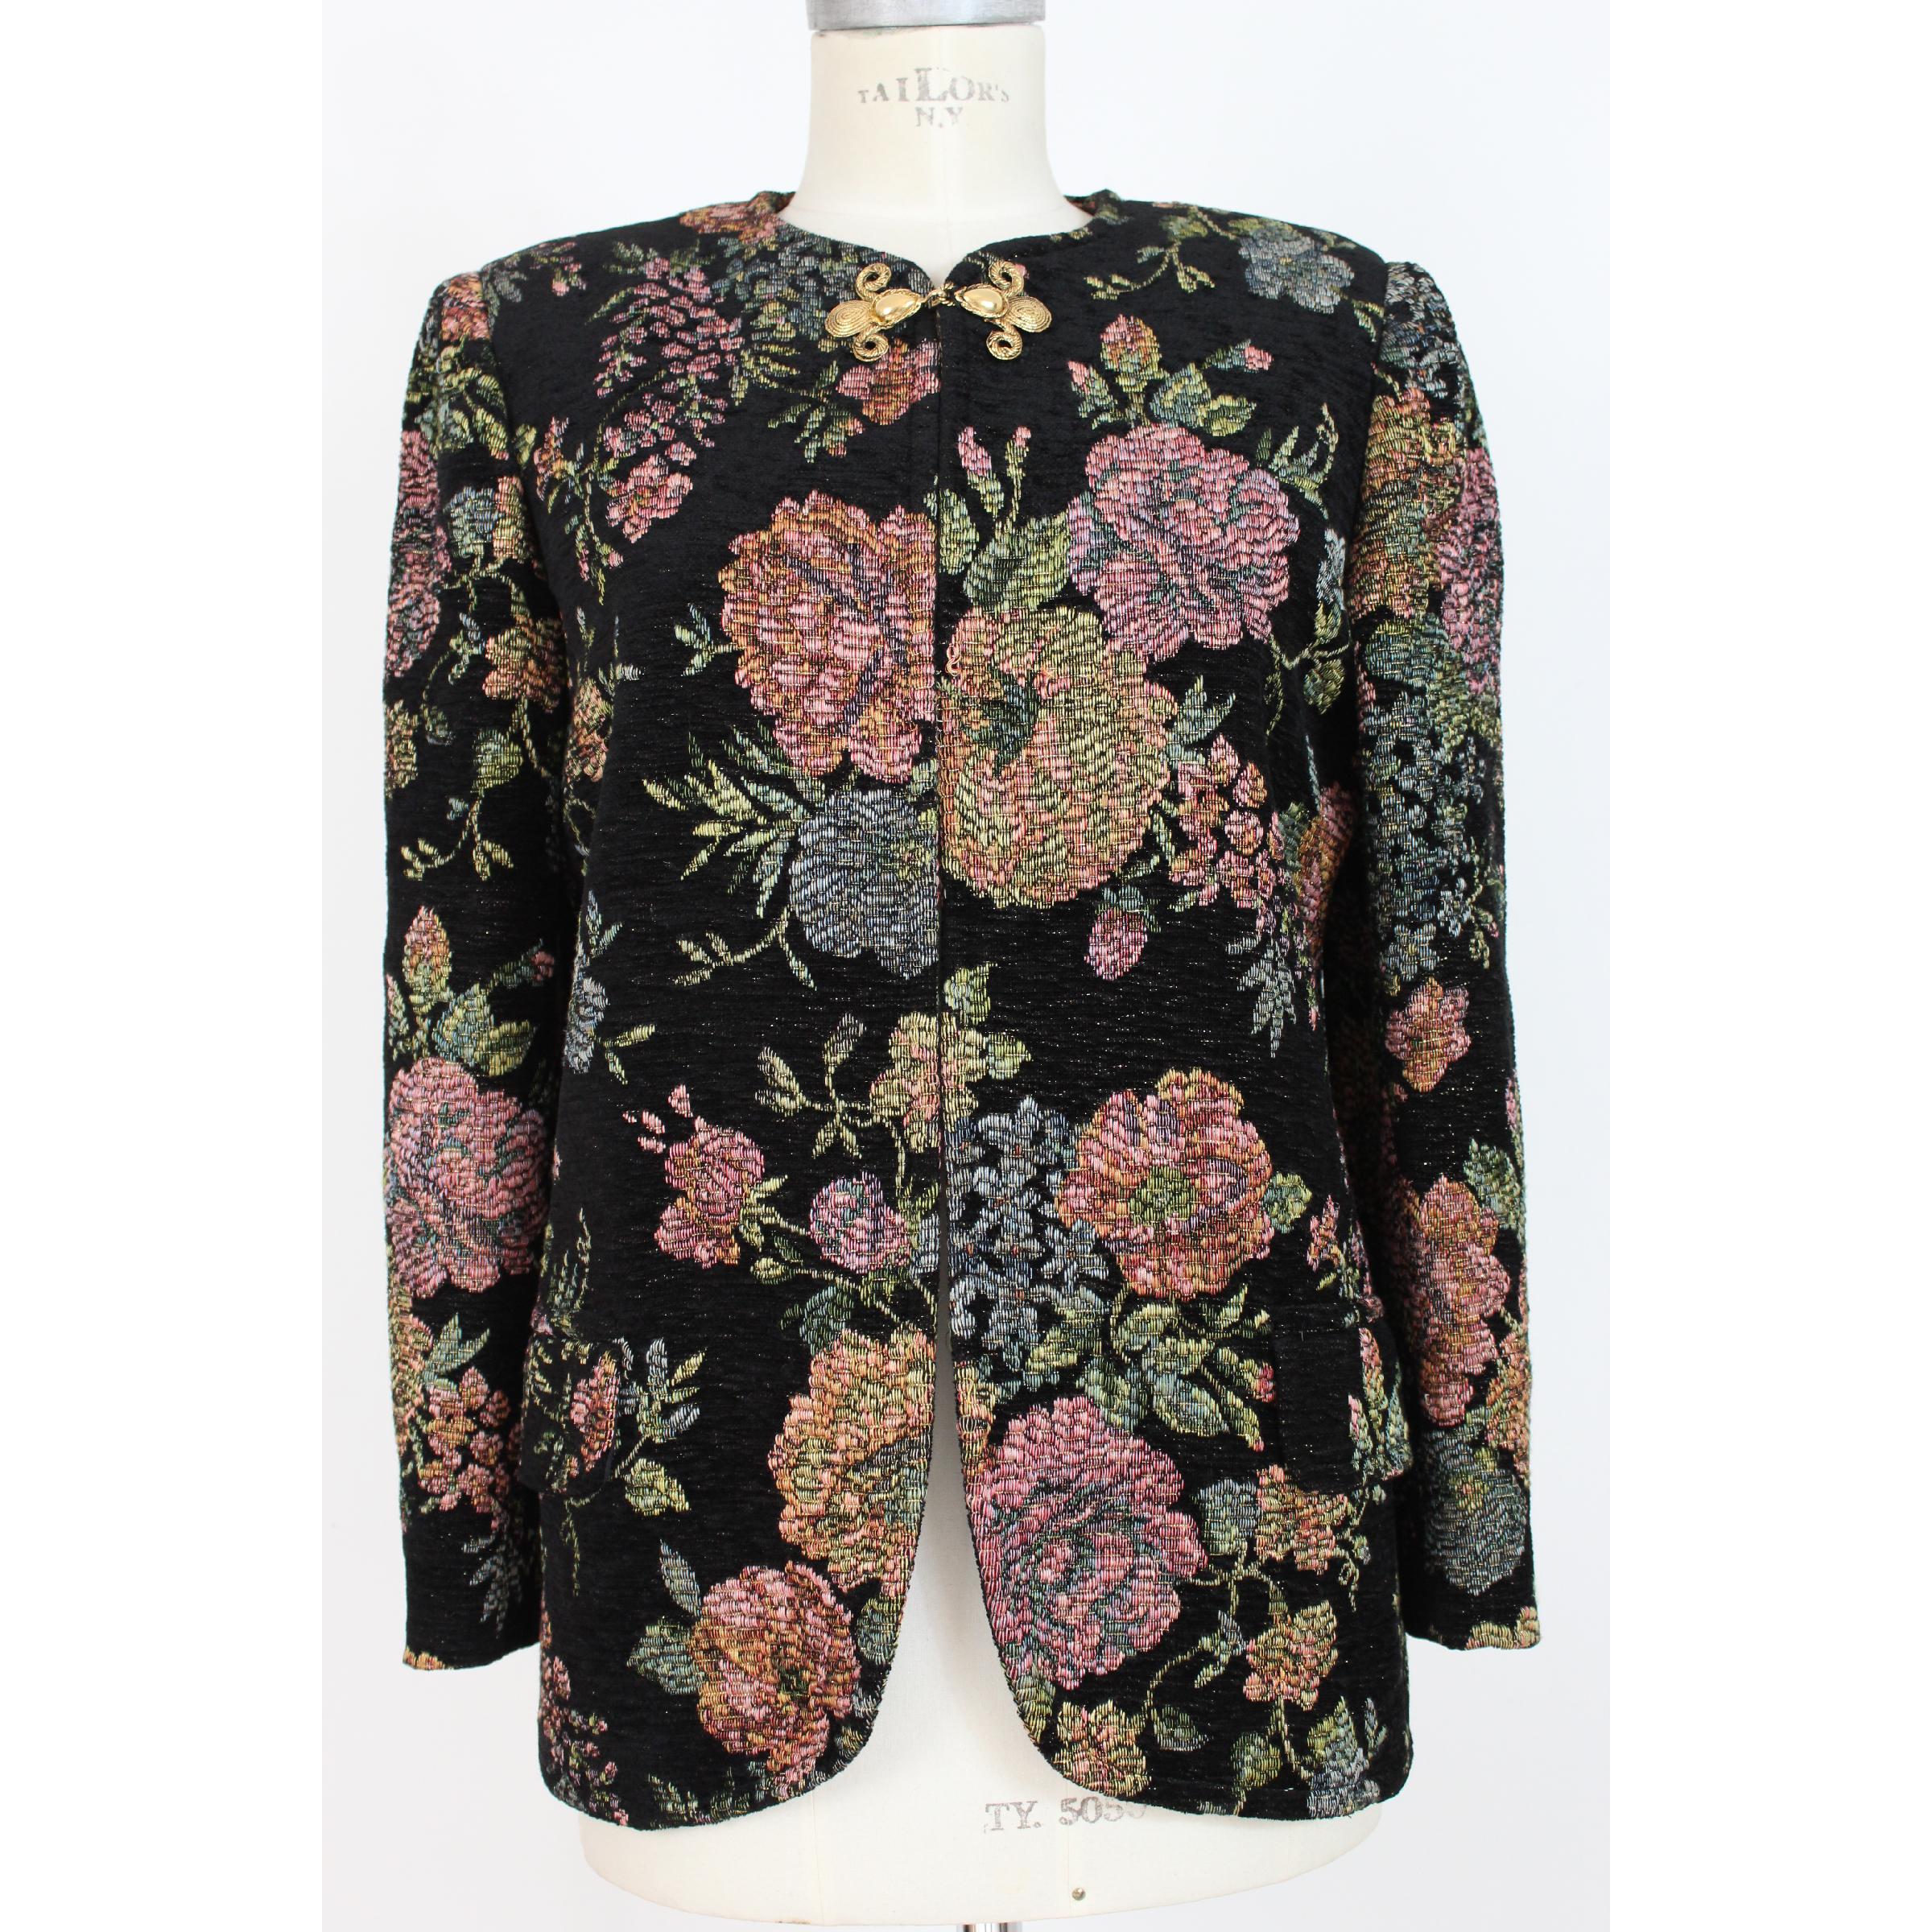 Emanuel Ungaro vintage women's jacket in wool, black color with application of multicolored embroidered flowers. Chiusra with gold-colored hook. 1980s. Made in Italy. Excellent vintage conditions.

Size: 44 It 10 Us 12 Uk

Shoulder: 44 cm

Bust /